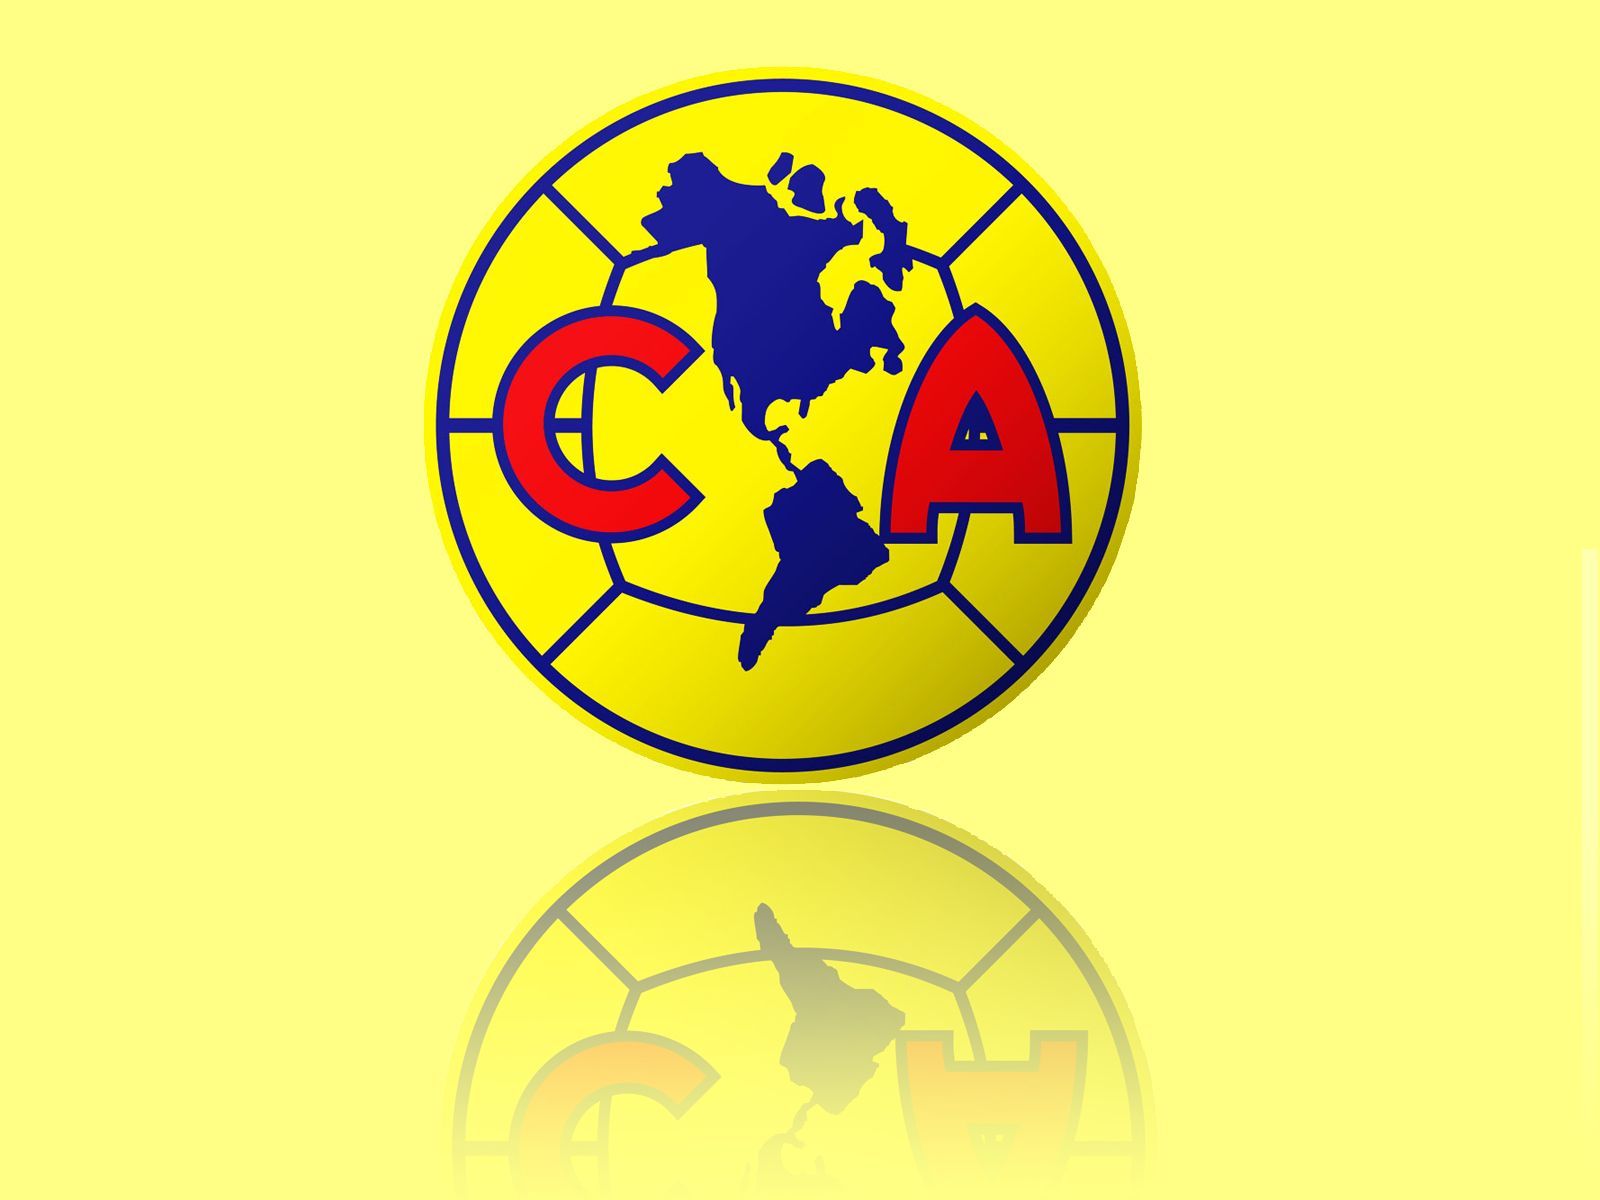 Download wallpapers Club America 4k Mexican Football Club material  design logo blue yellow abstraction Mexico City Mexico Primera  Division Liga MX America FC for desktop free Pictures for desktop free